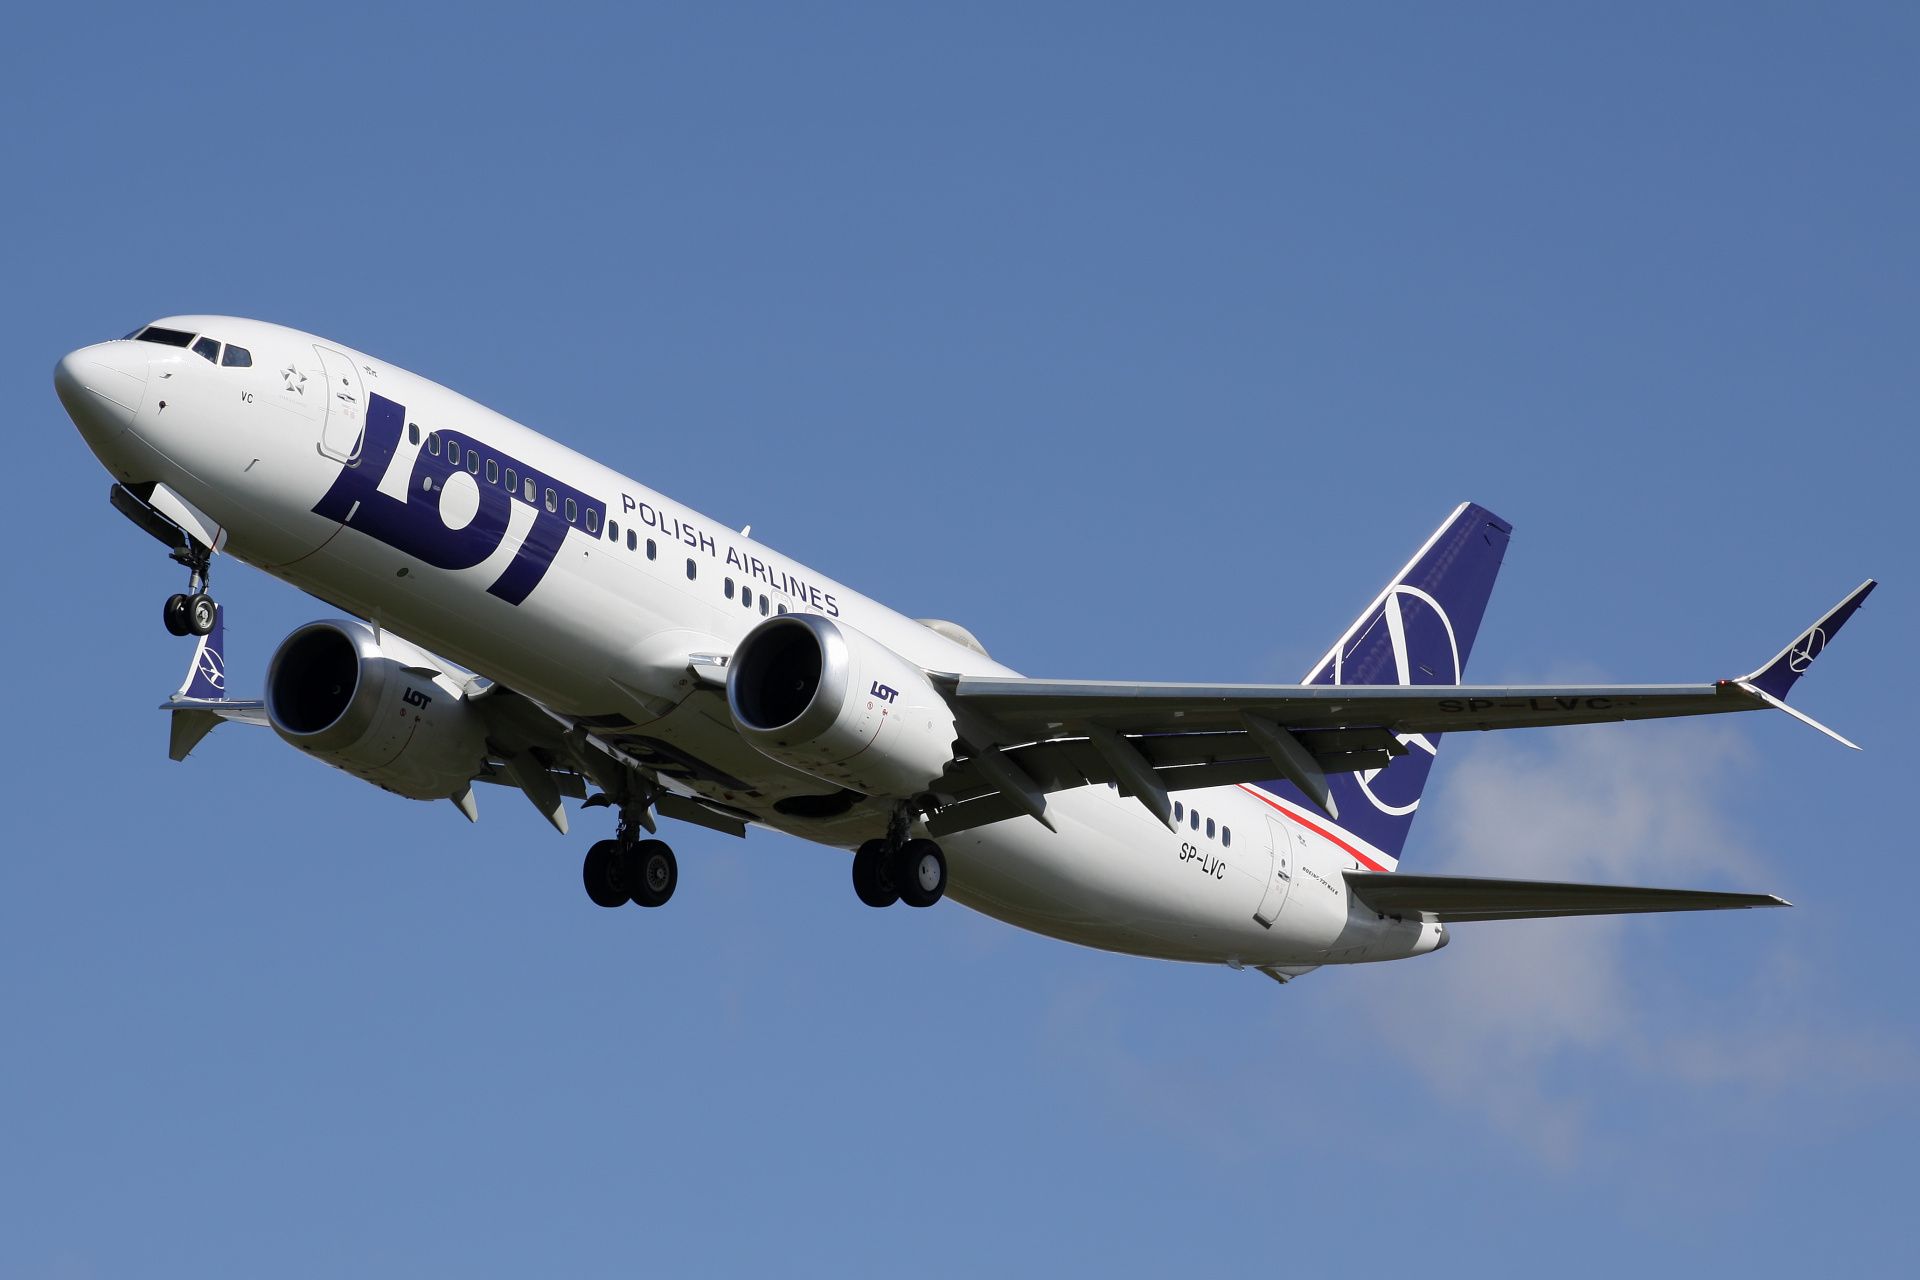 SP-LVC (Aircraft » EPWA Spotting » Boeing 737-8 MAX » LOT Polish Airlines)